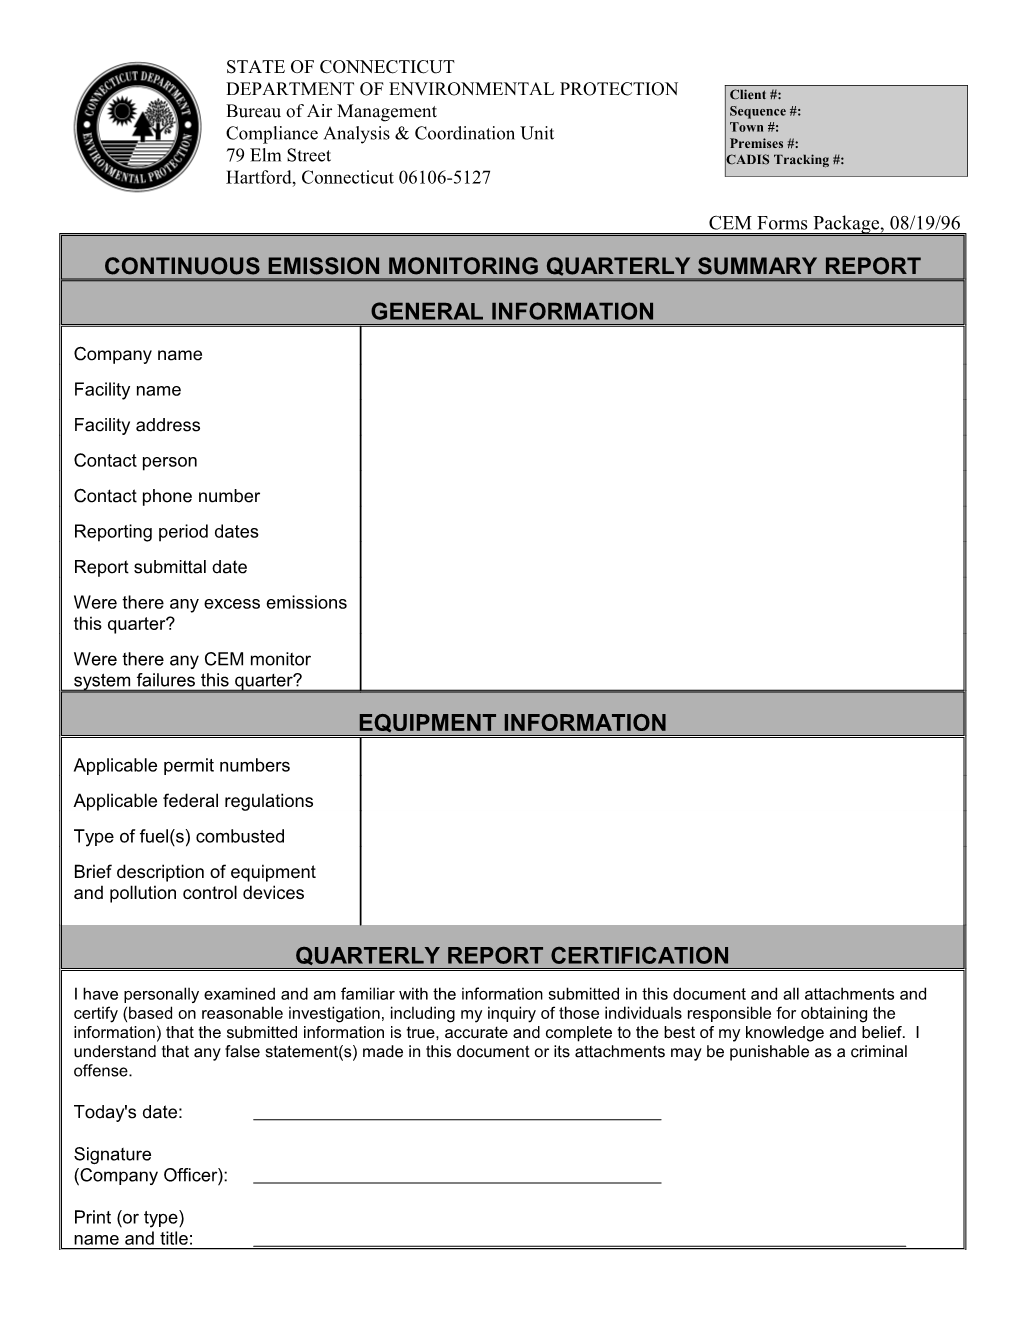 Continuous Emission Monitoring Quarterly Summary Report Word Form